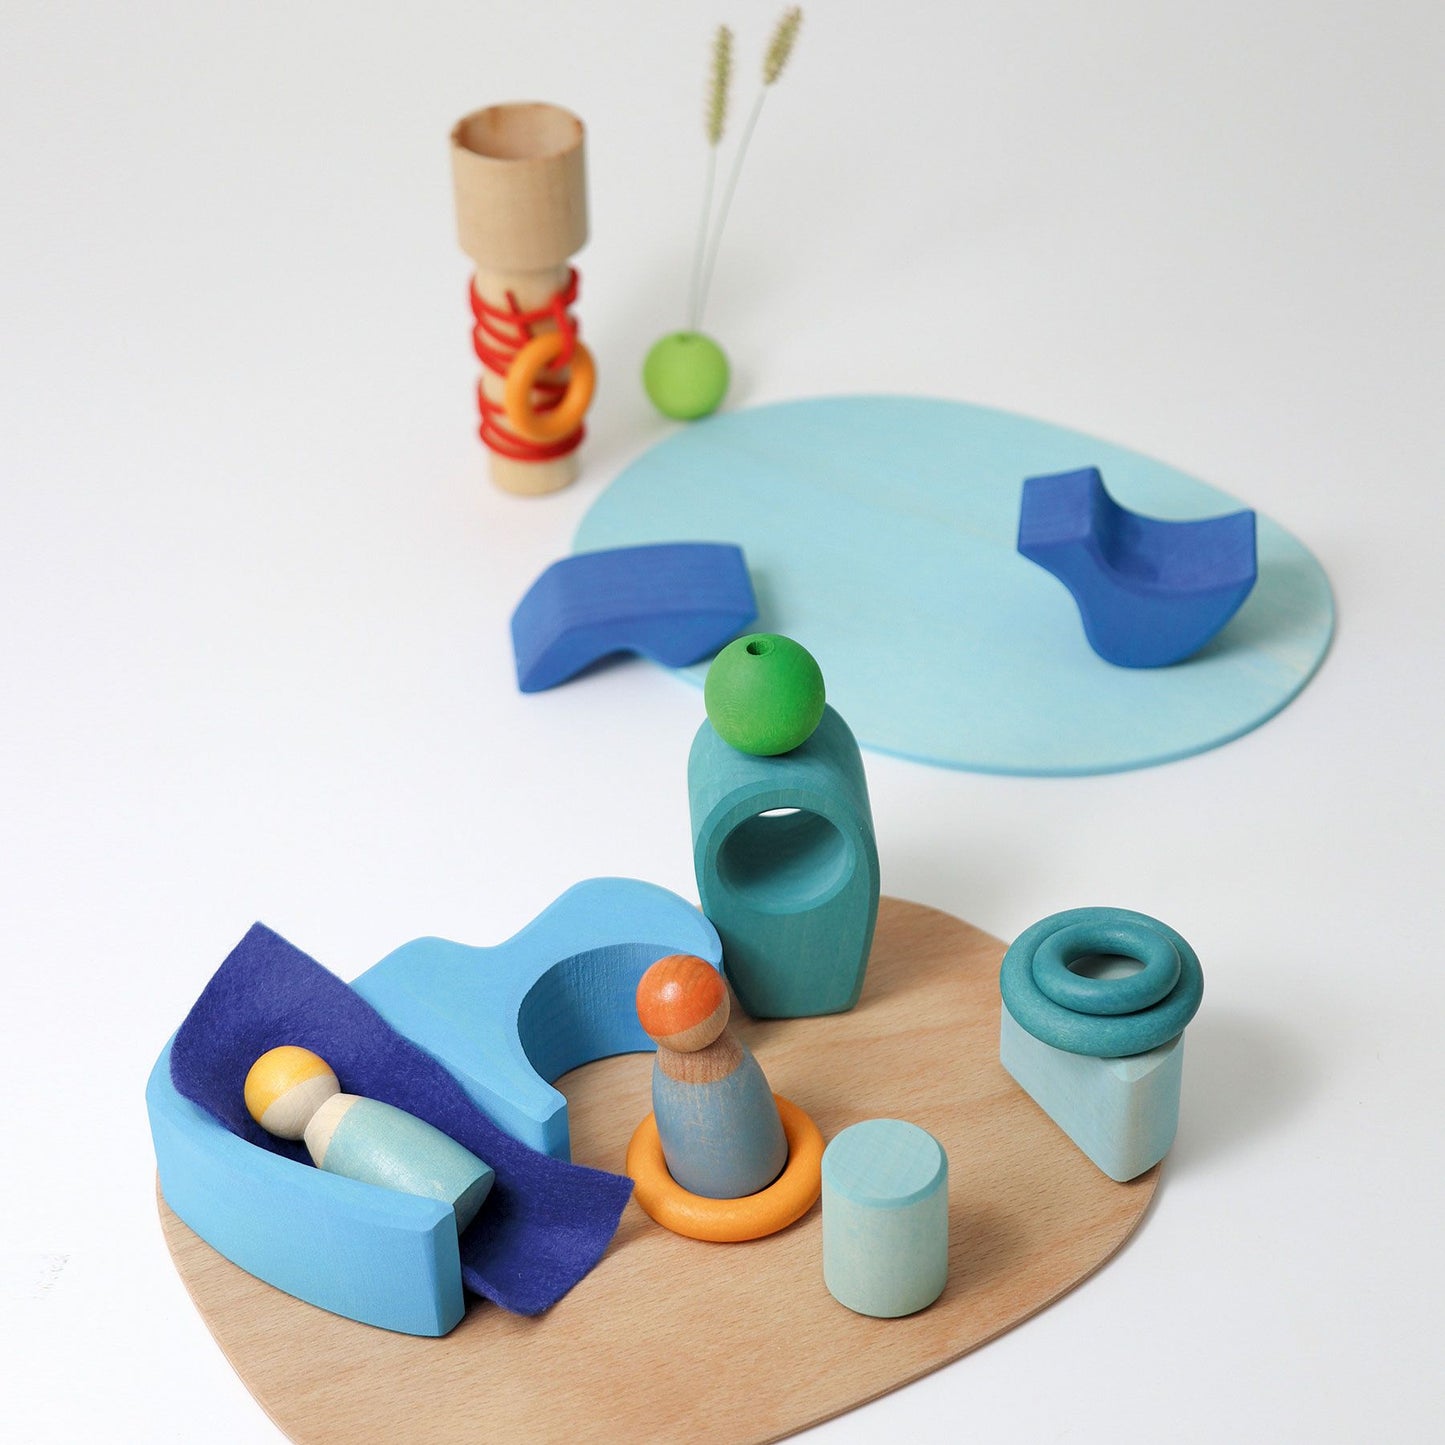 Play by the Water | Small World Playset | Wooden Toys for Kids | Open-Ended Play